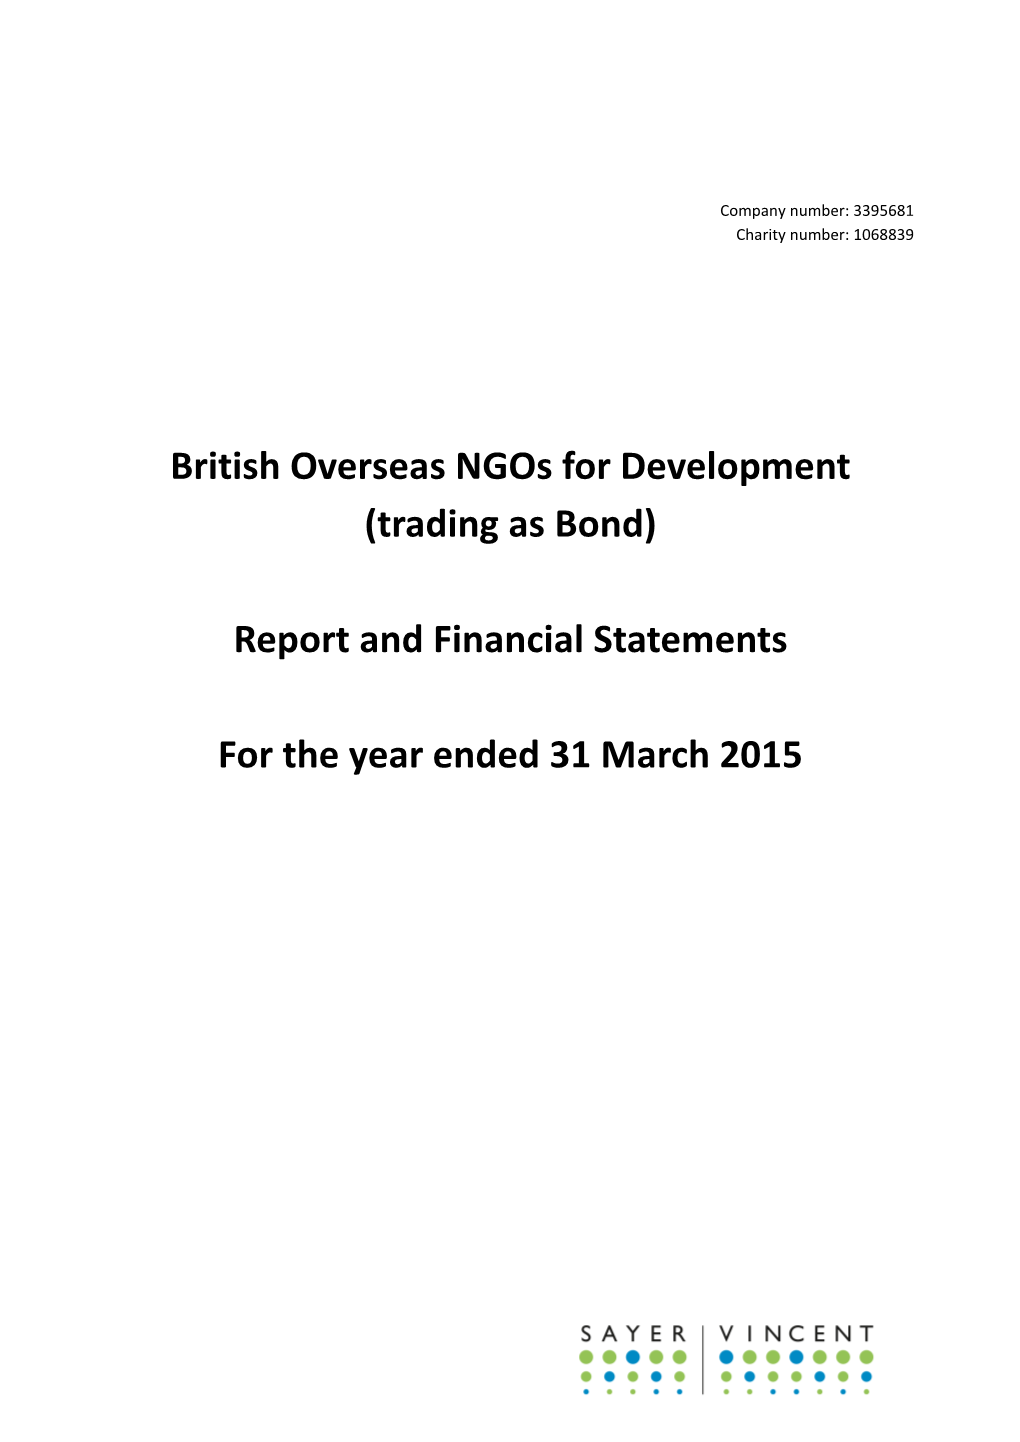 British Overseas Ngos for Development (Trading As Bond) Report and Financial Statements for the Year Ended 31 March 2015